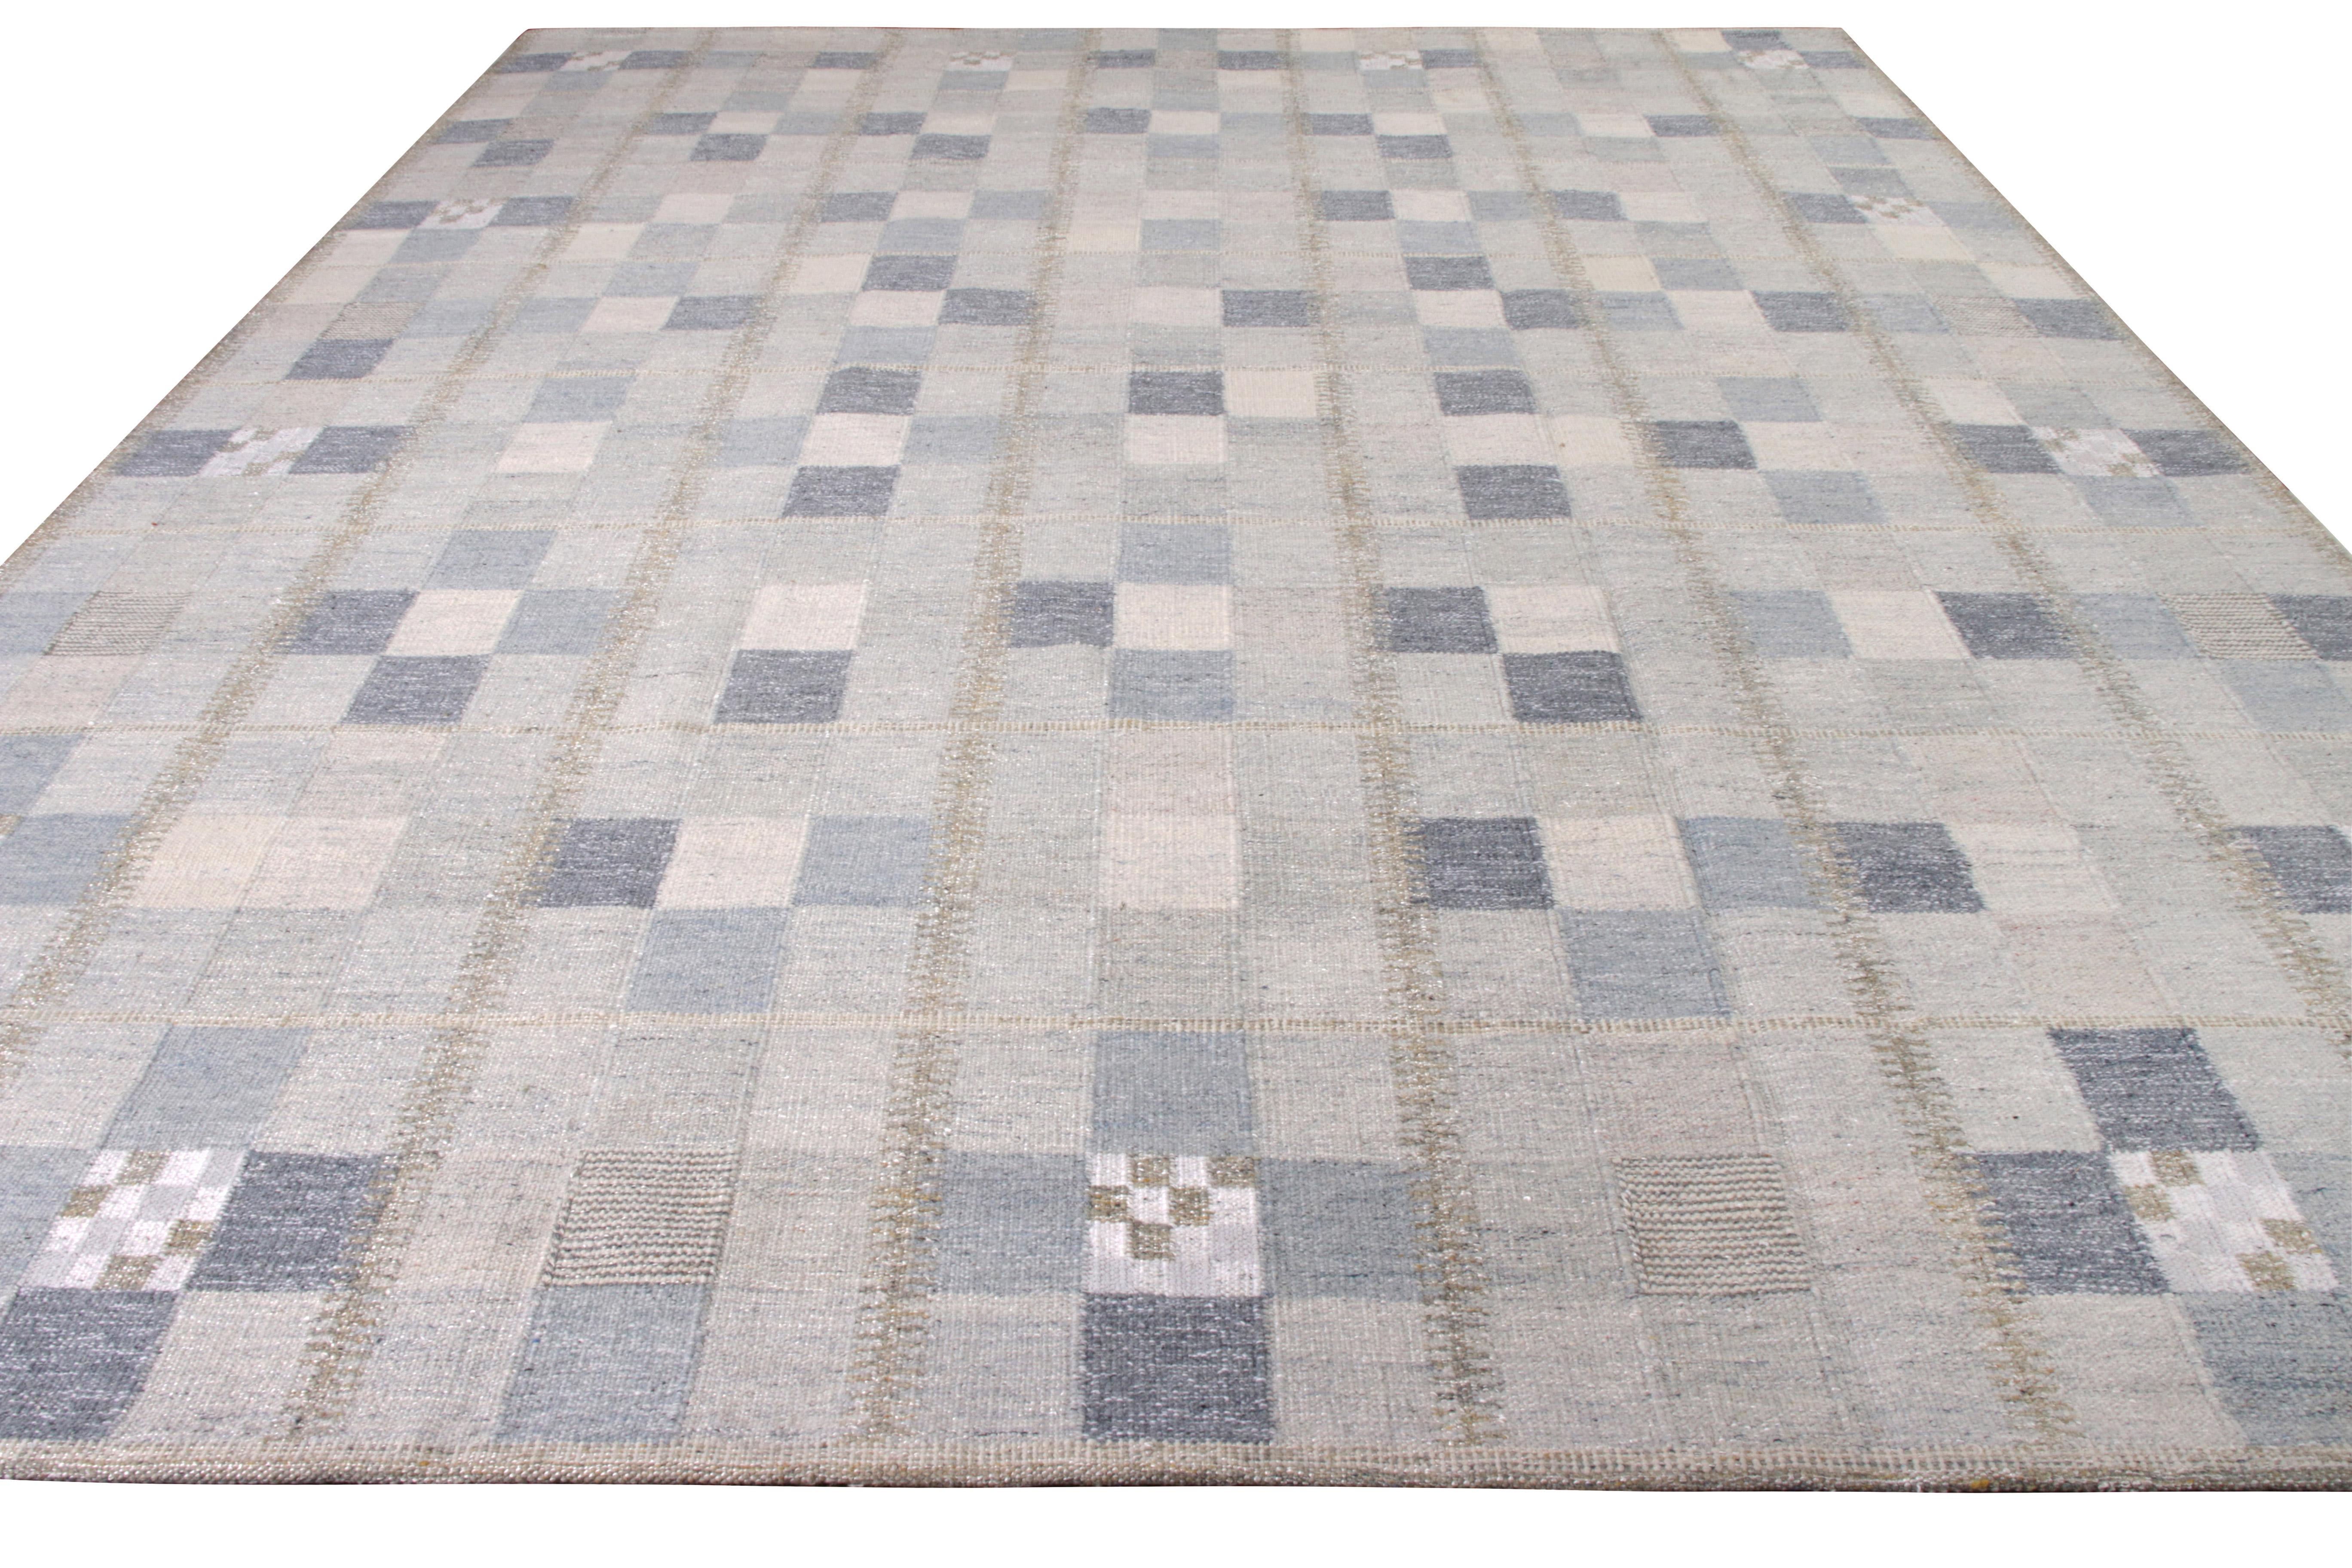 Emanating the elegance of Swedish artistic sensibilities, this 12 x 15 Kilim represents custom flat weave designs available from Rug & Kilim’s Scandinavian Collection. The remarkable mid-century influence can be noted through an enticing pattern